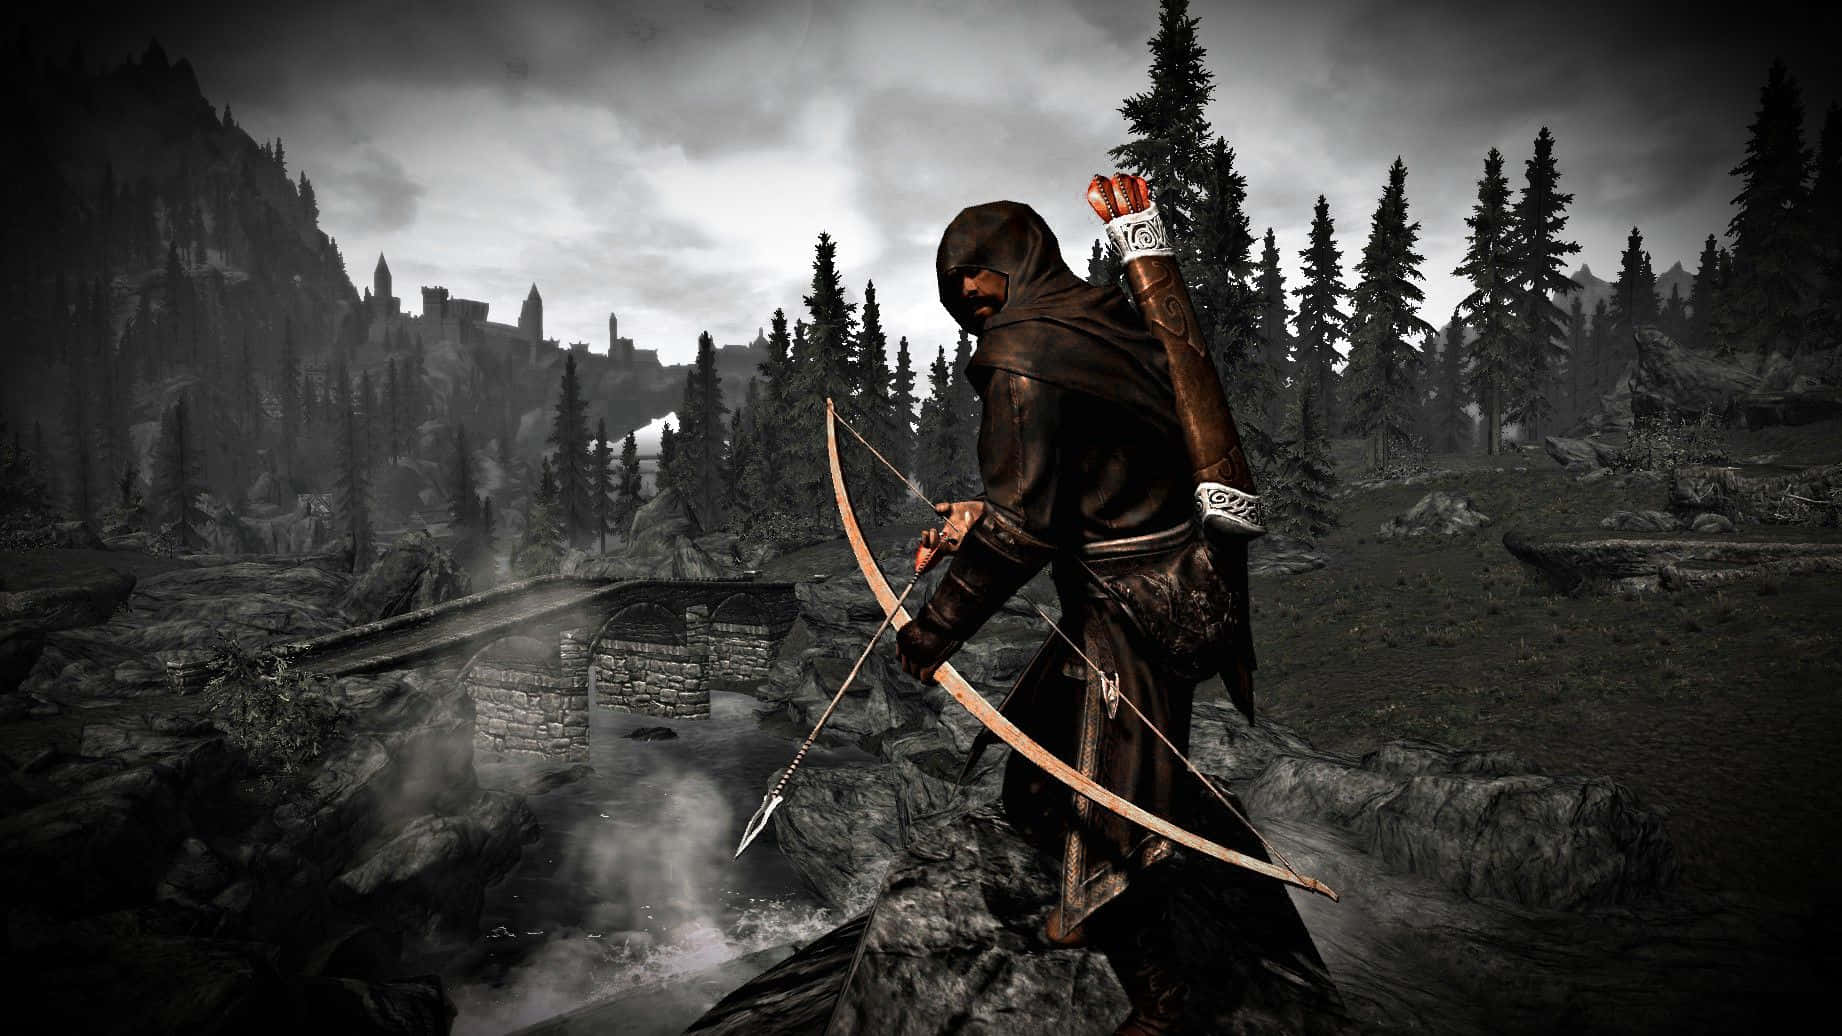 An epic and spellbinding view from the world of Best Skyrim Wallpaper